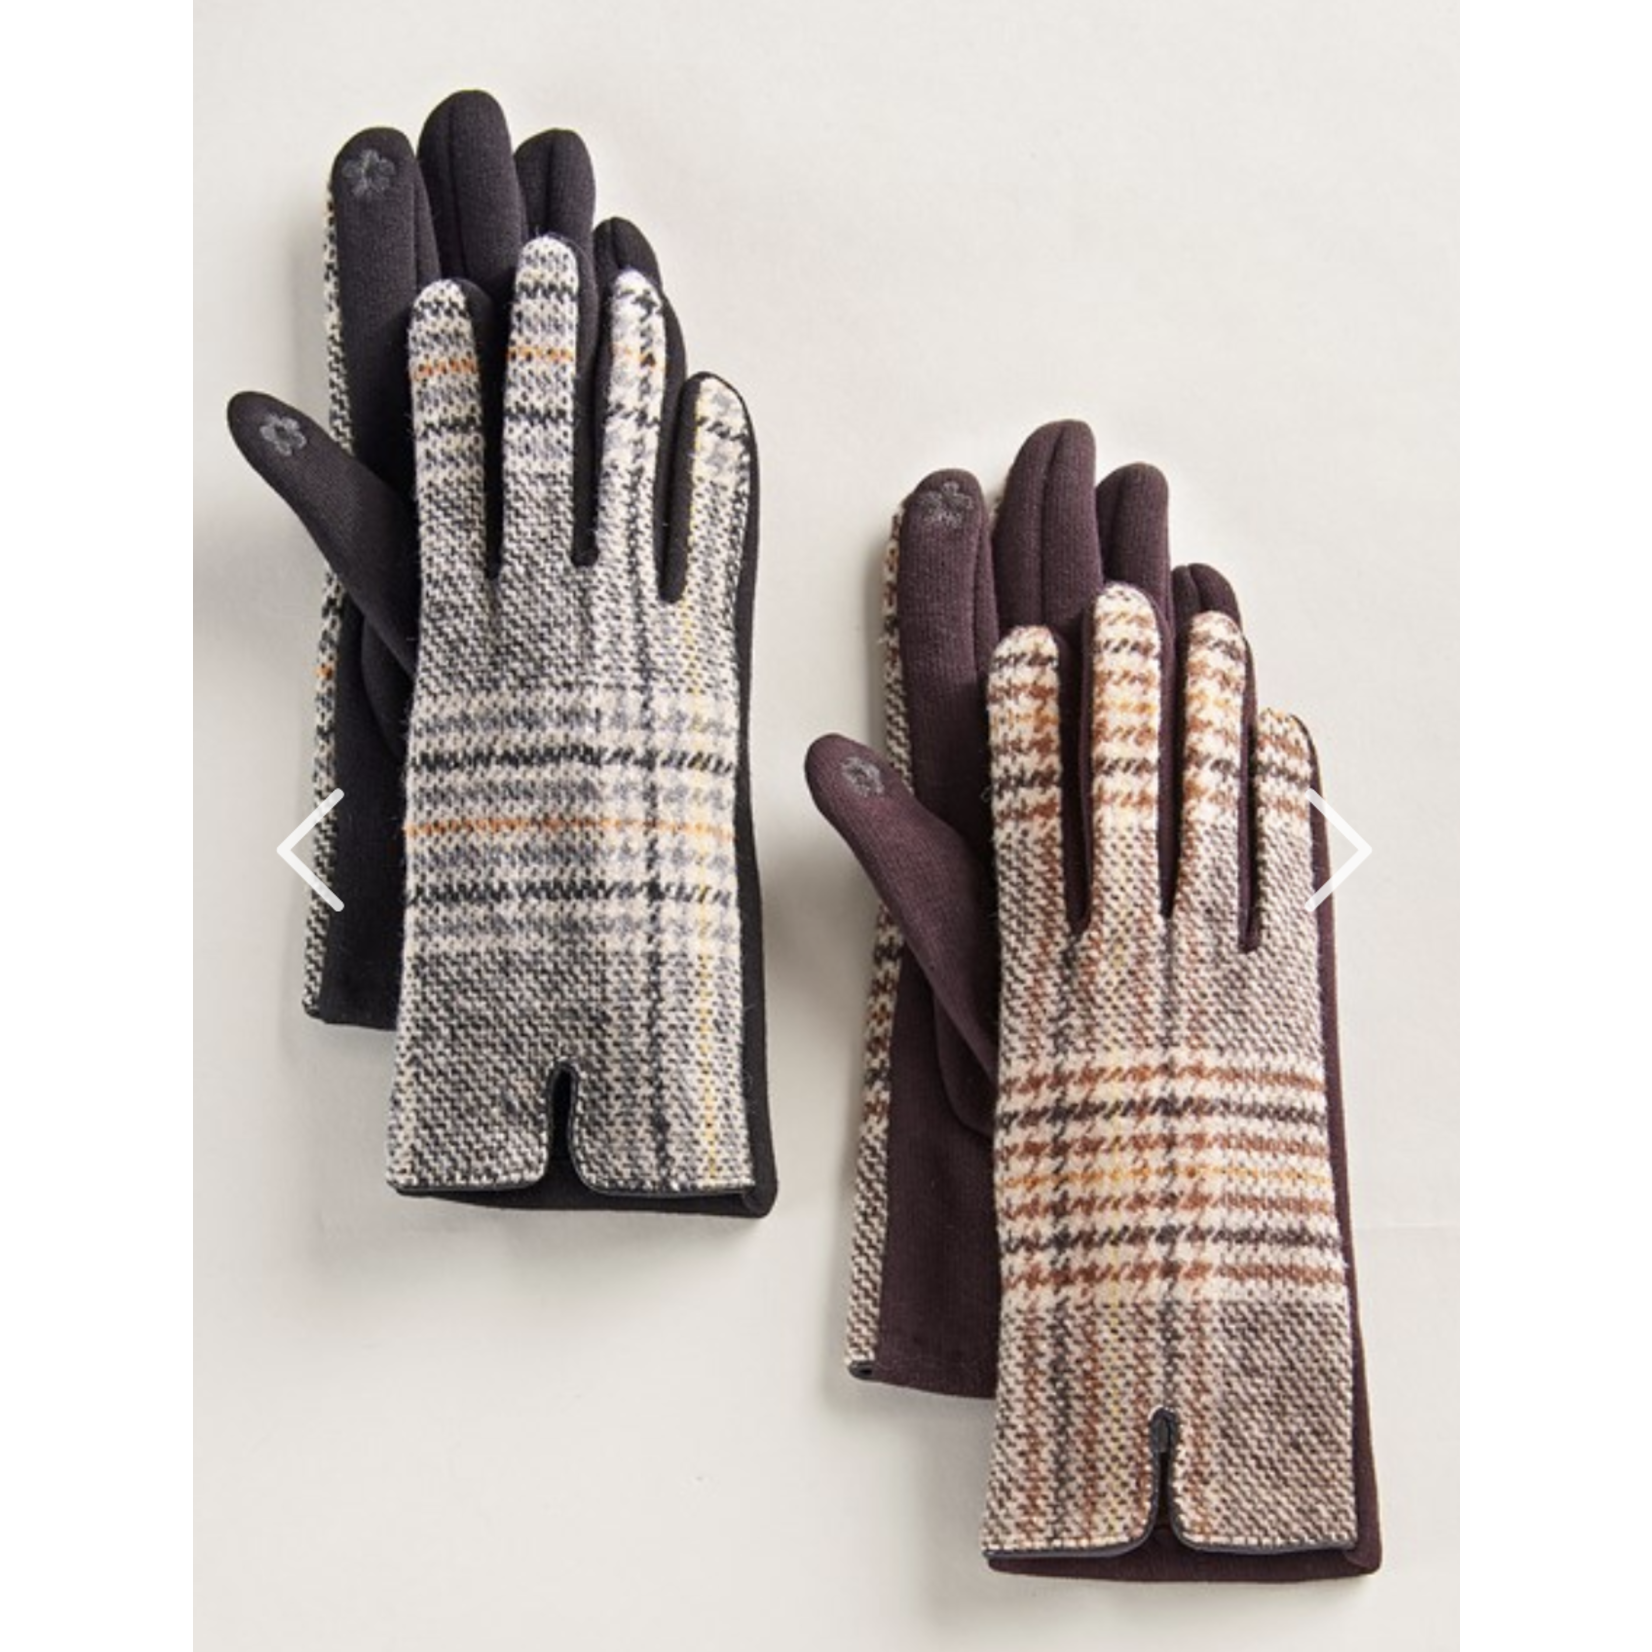 Giftcraft Classic Houndstooth Gloves in a Cotton Elastane Blend